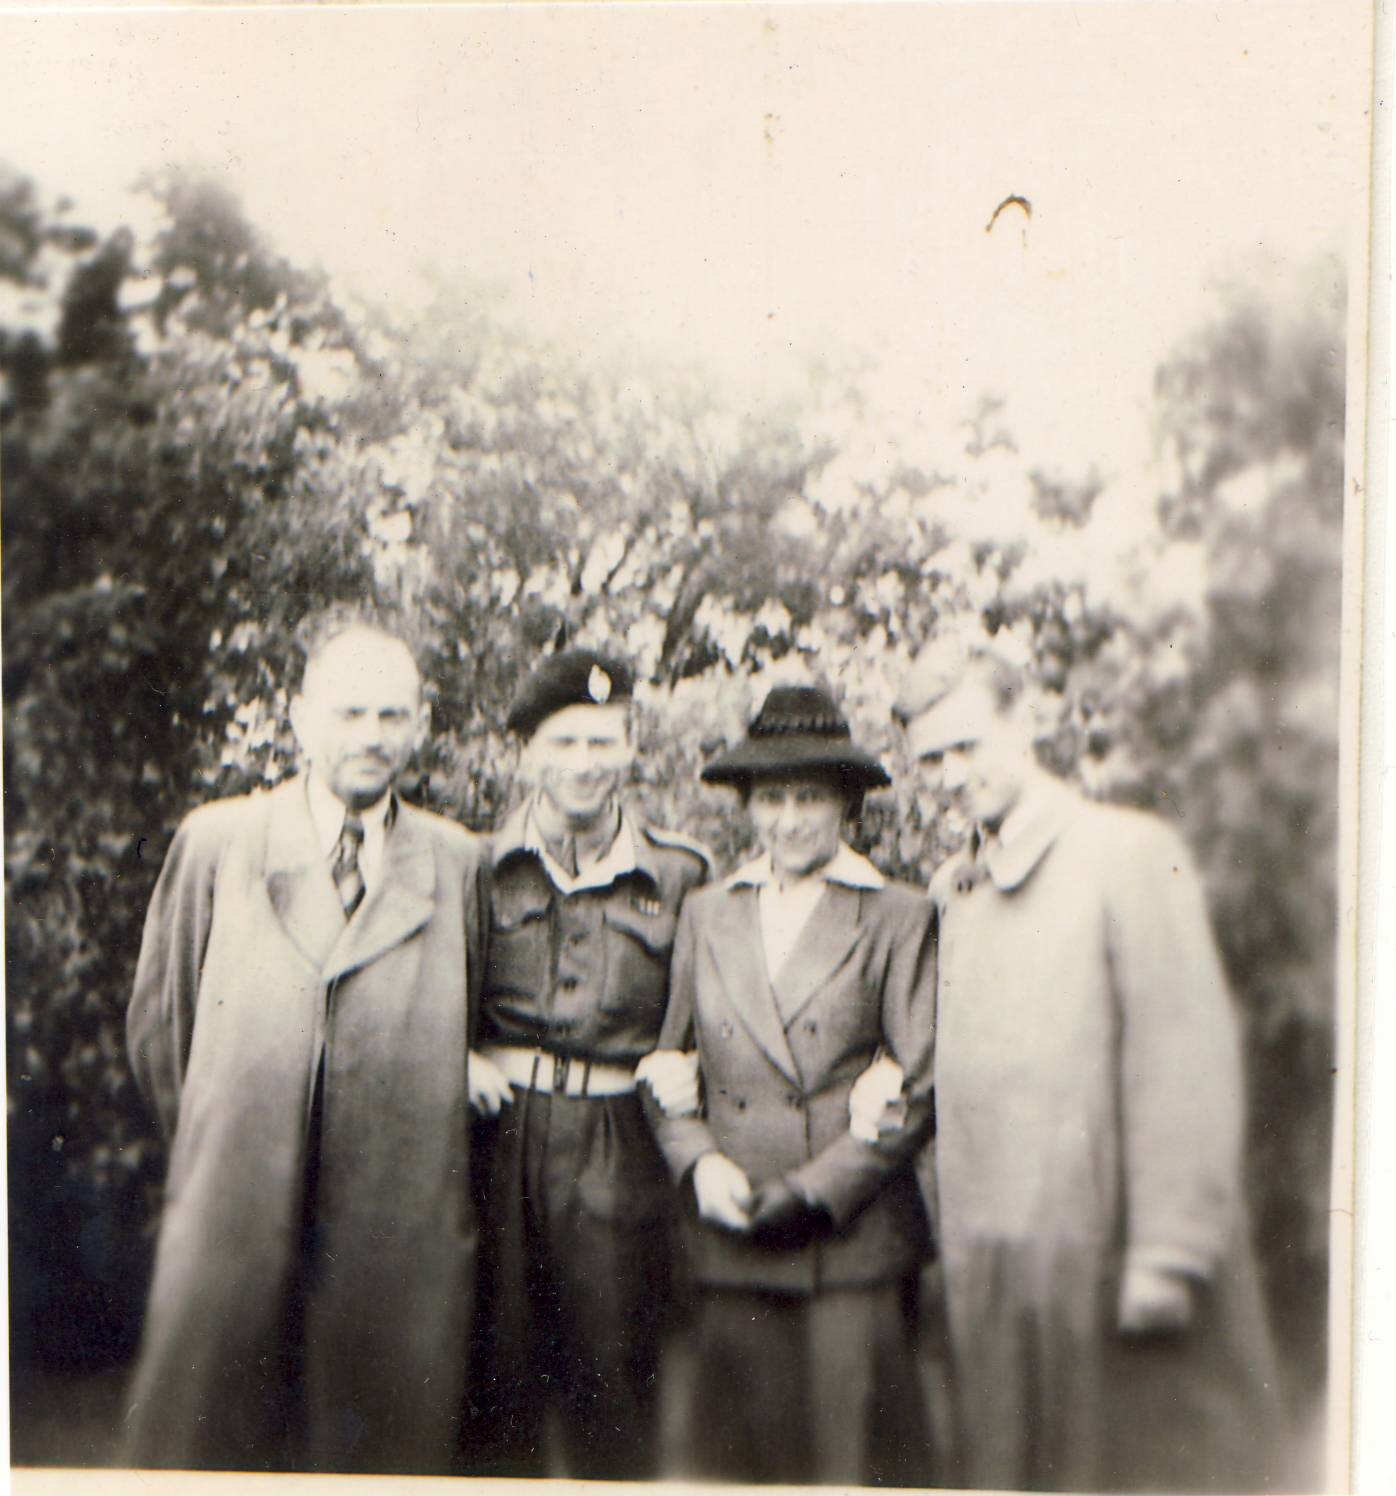 Curt and Gertrude Weiss, Kenneth and Gerhardt